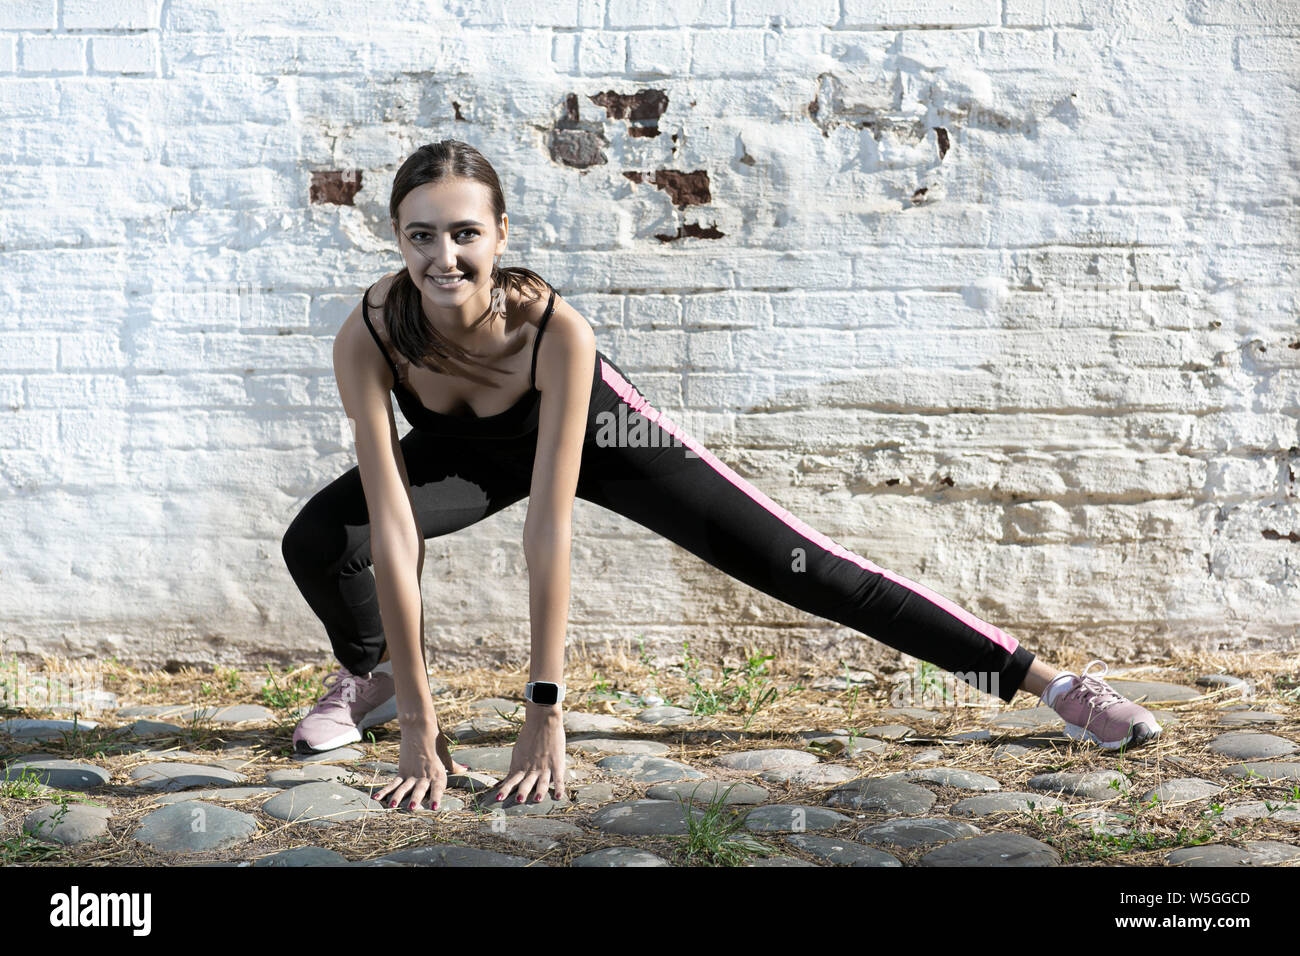 Fitness sport girl in fashion sportswear doing yoga fitness exercise in the street, outdoor sports, urban style Stock Photo